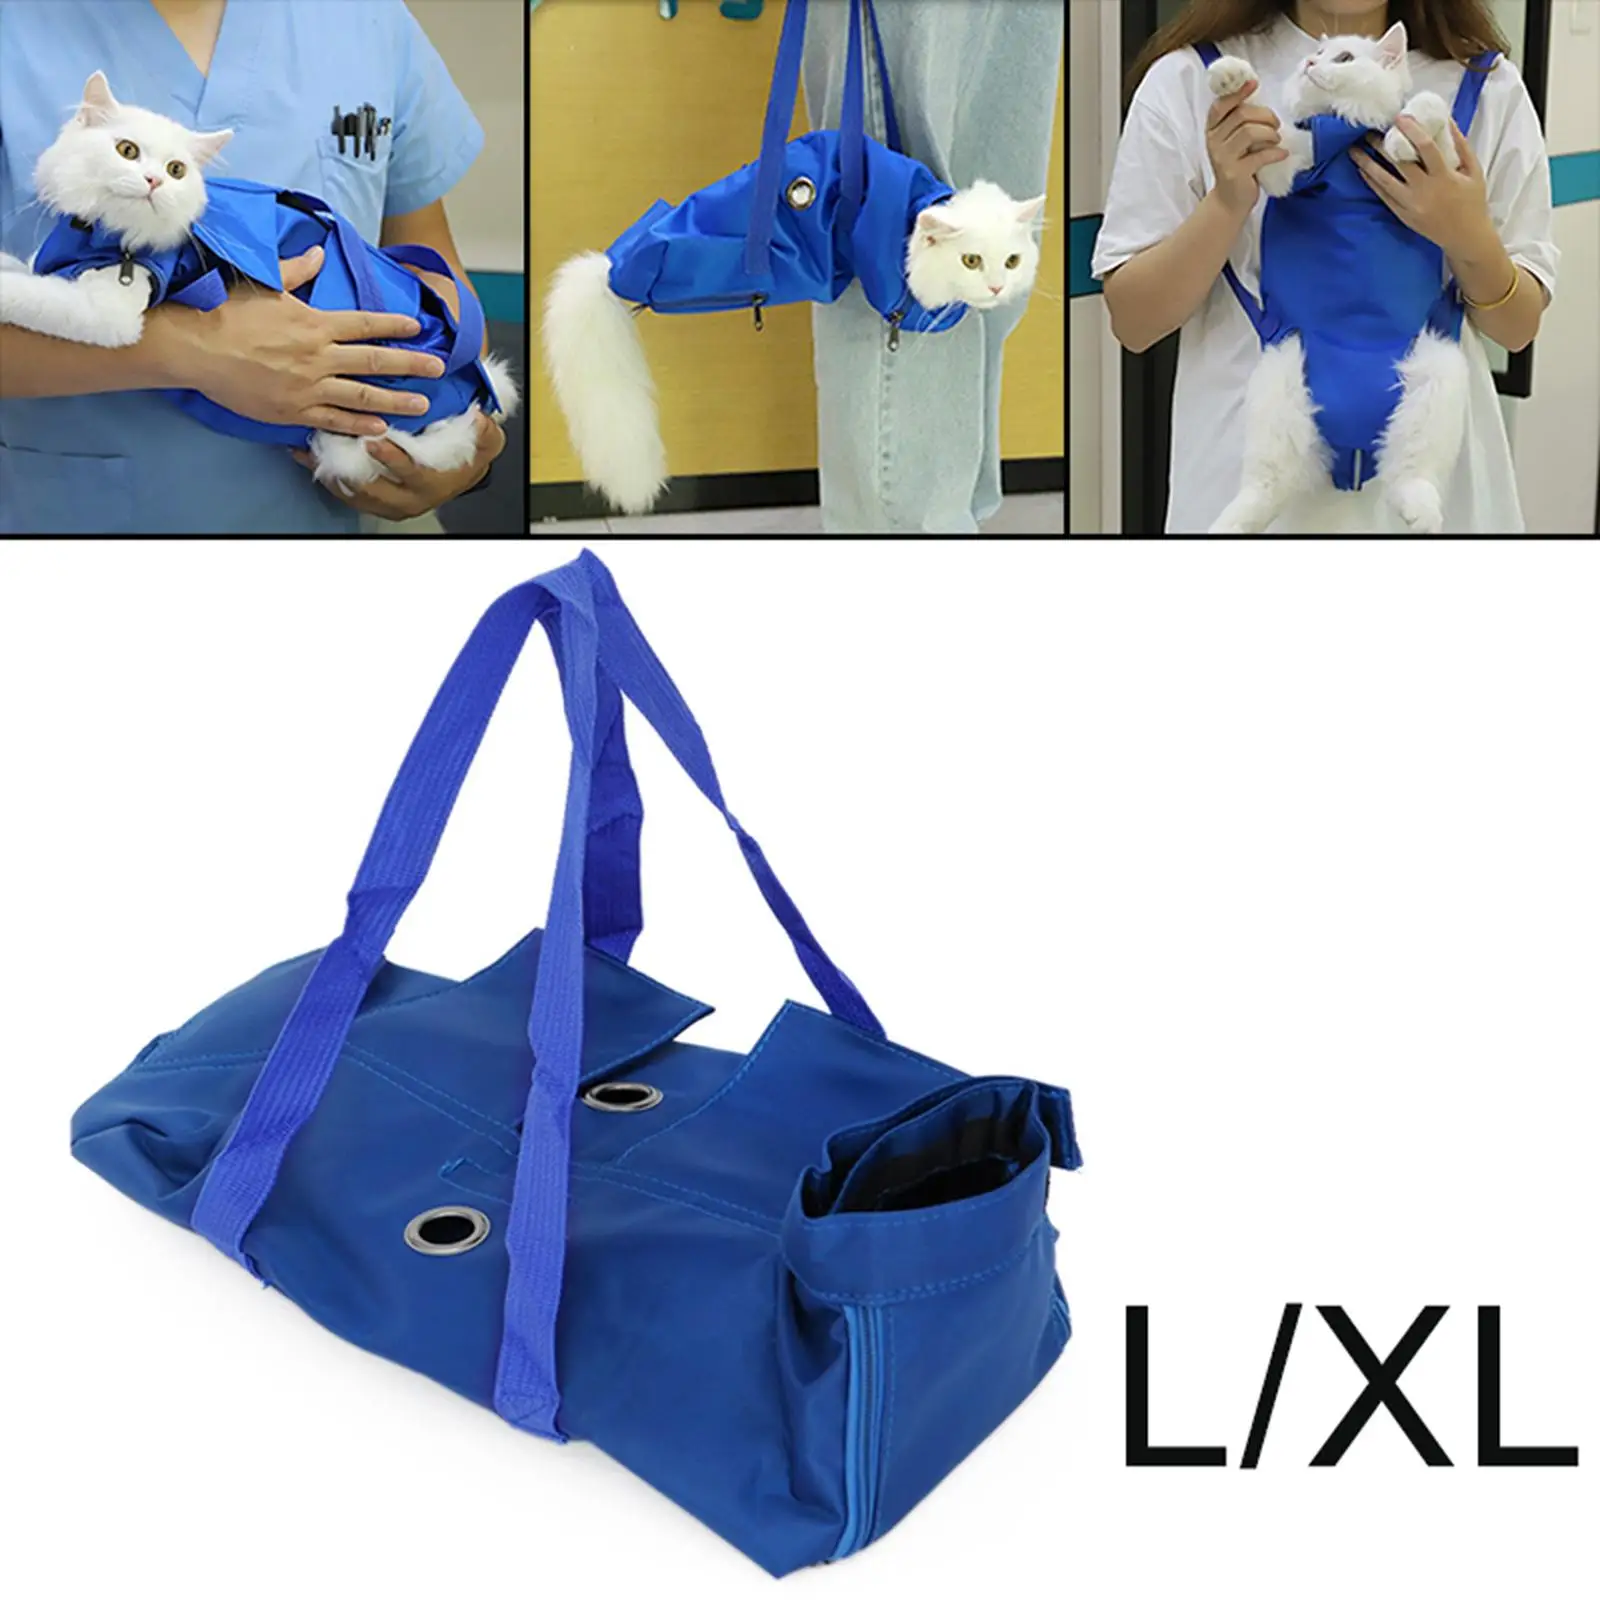 Cat Grooming Restraint Bag Oxford Cloth Adjustable Size Holder Bag Fixed Bag for Nail Cutting Washing Manicure Pets Short Trips